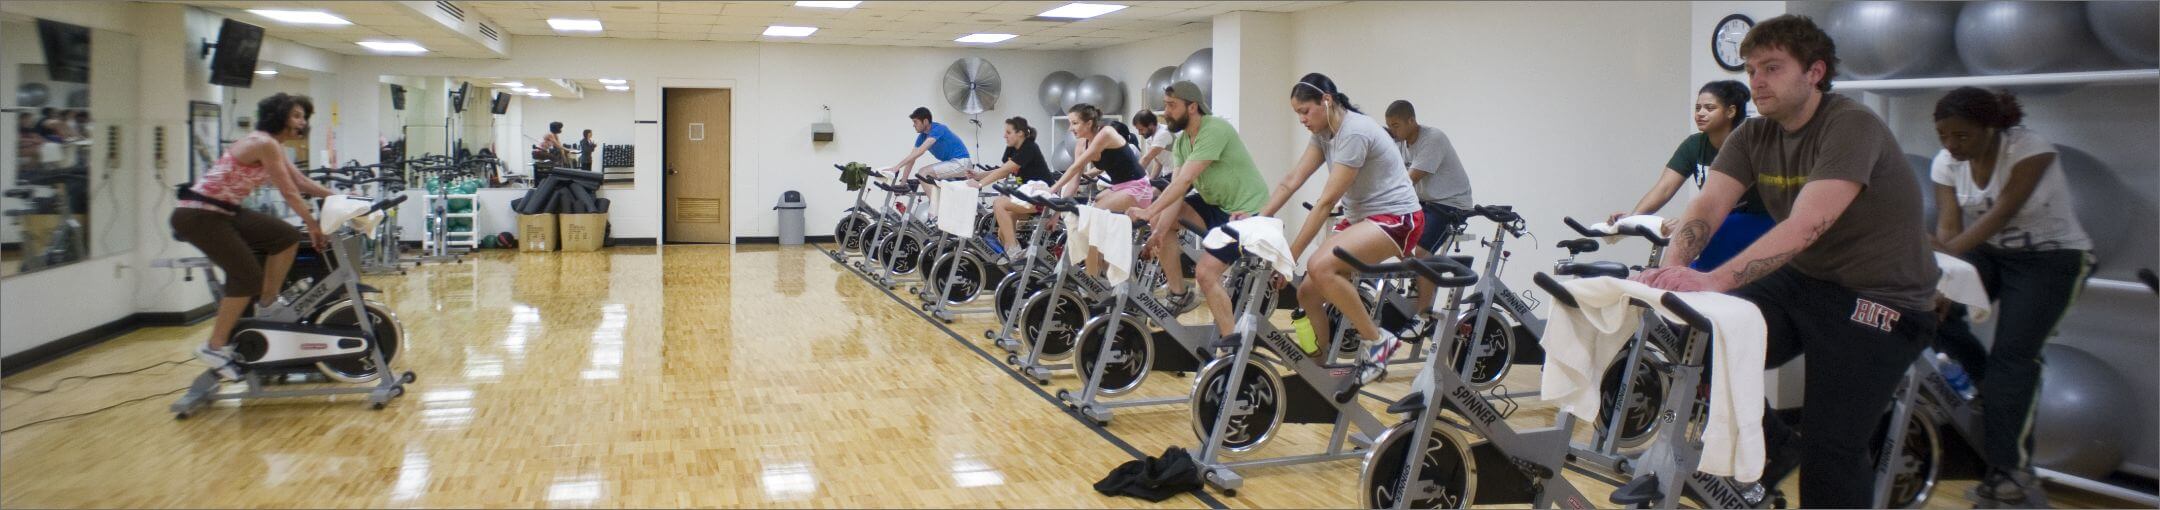 Students in an indoor cycling class.